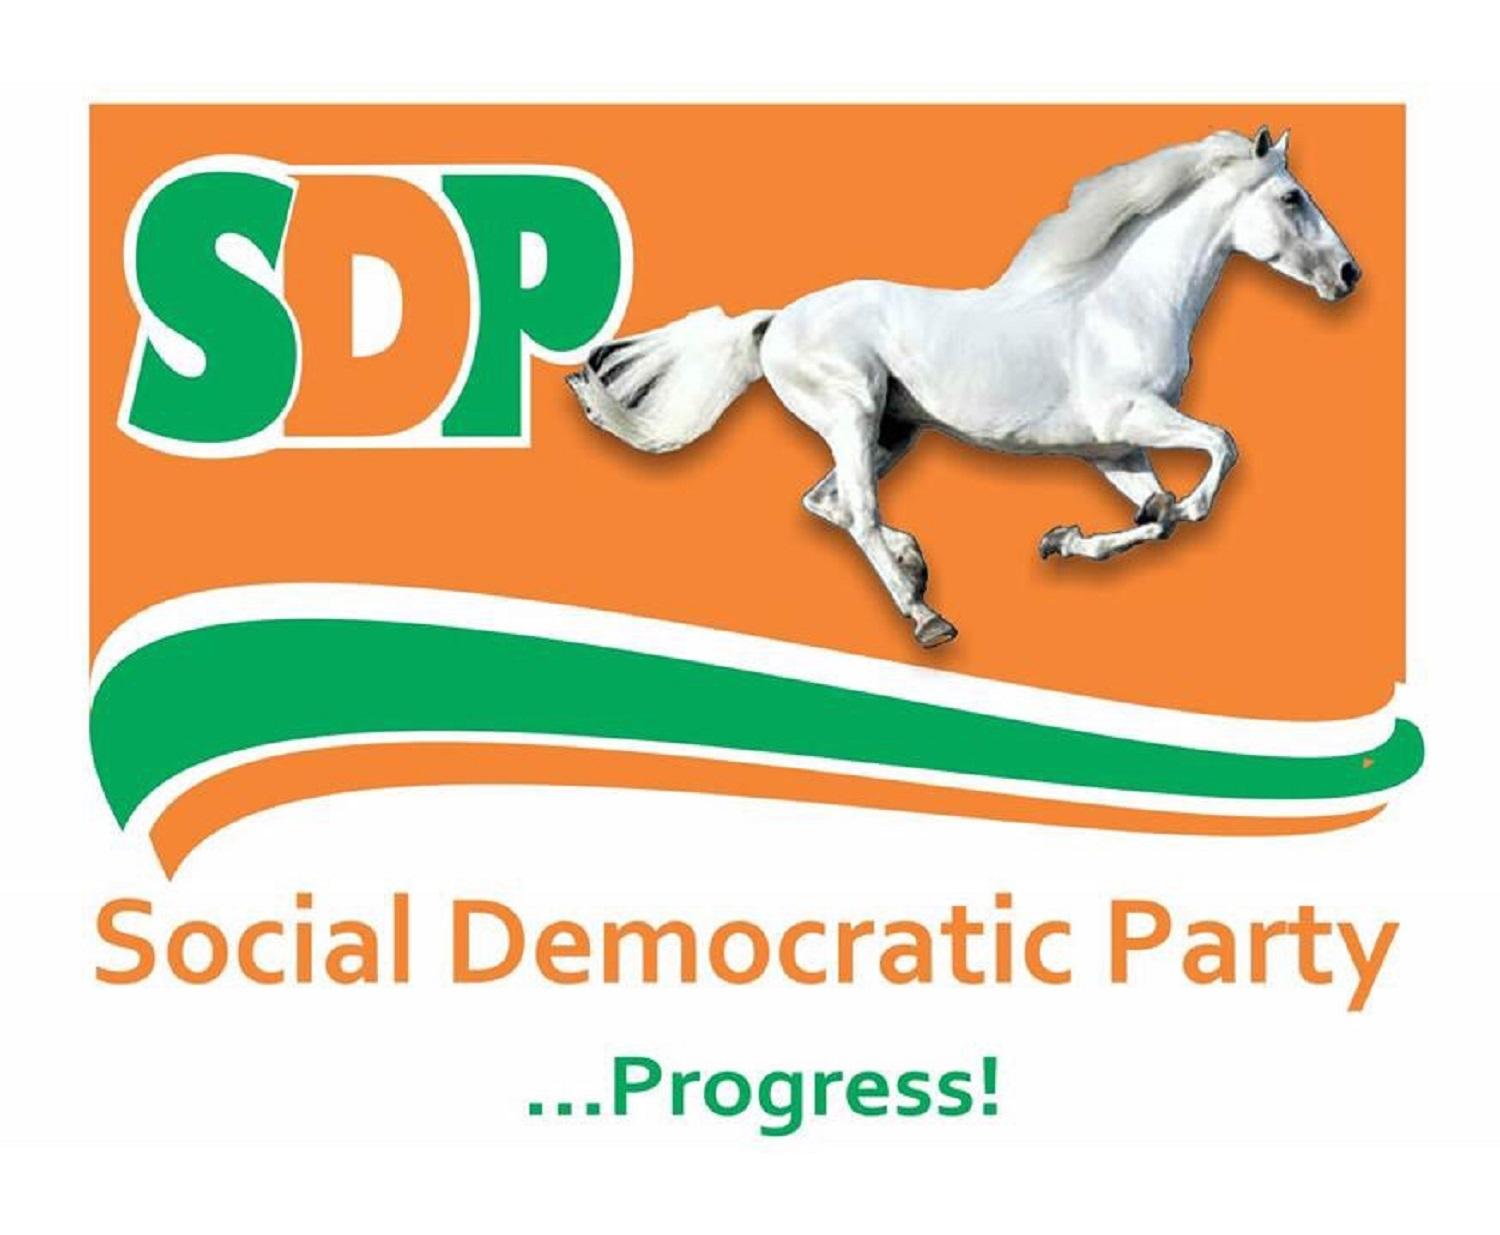 ONDO DECIDES 2020: Two governorship candidates emerge in Ondo SDP